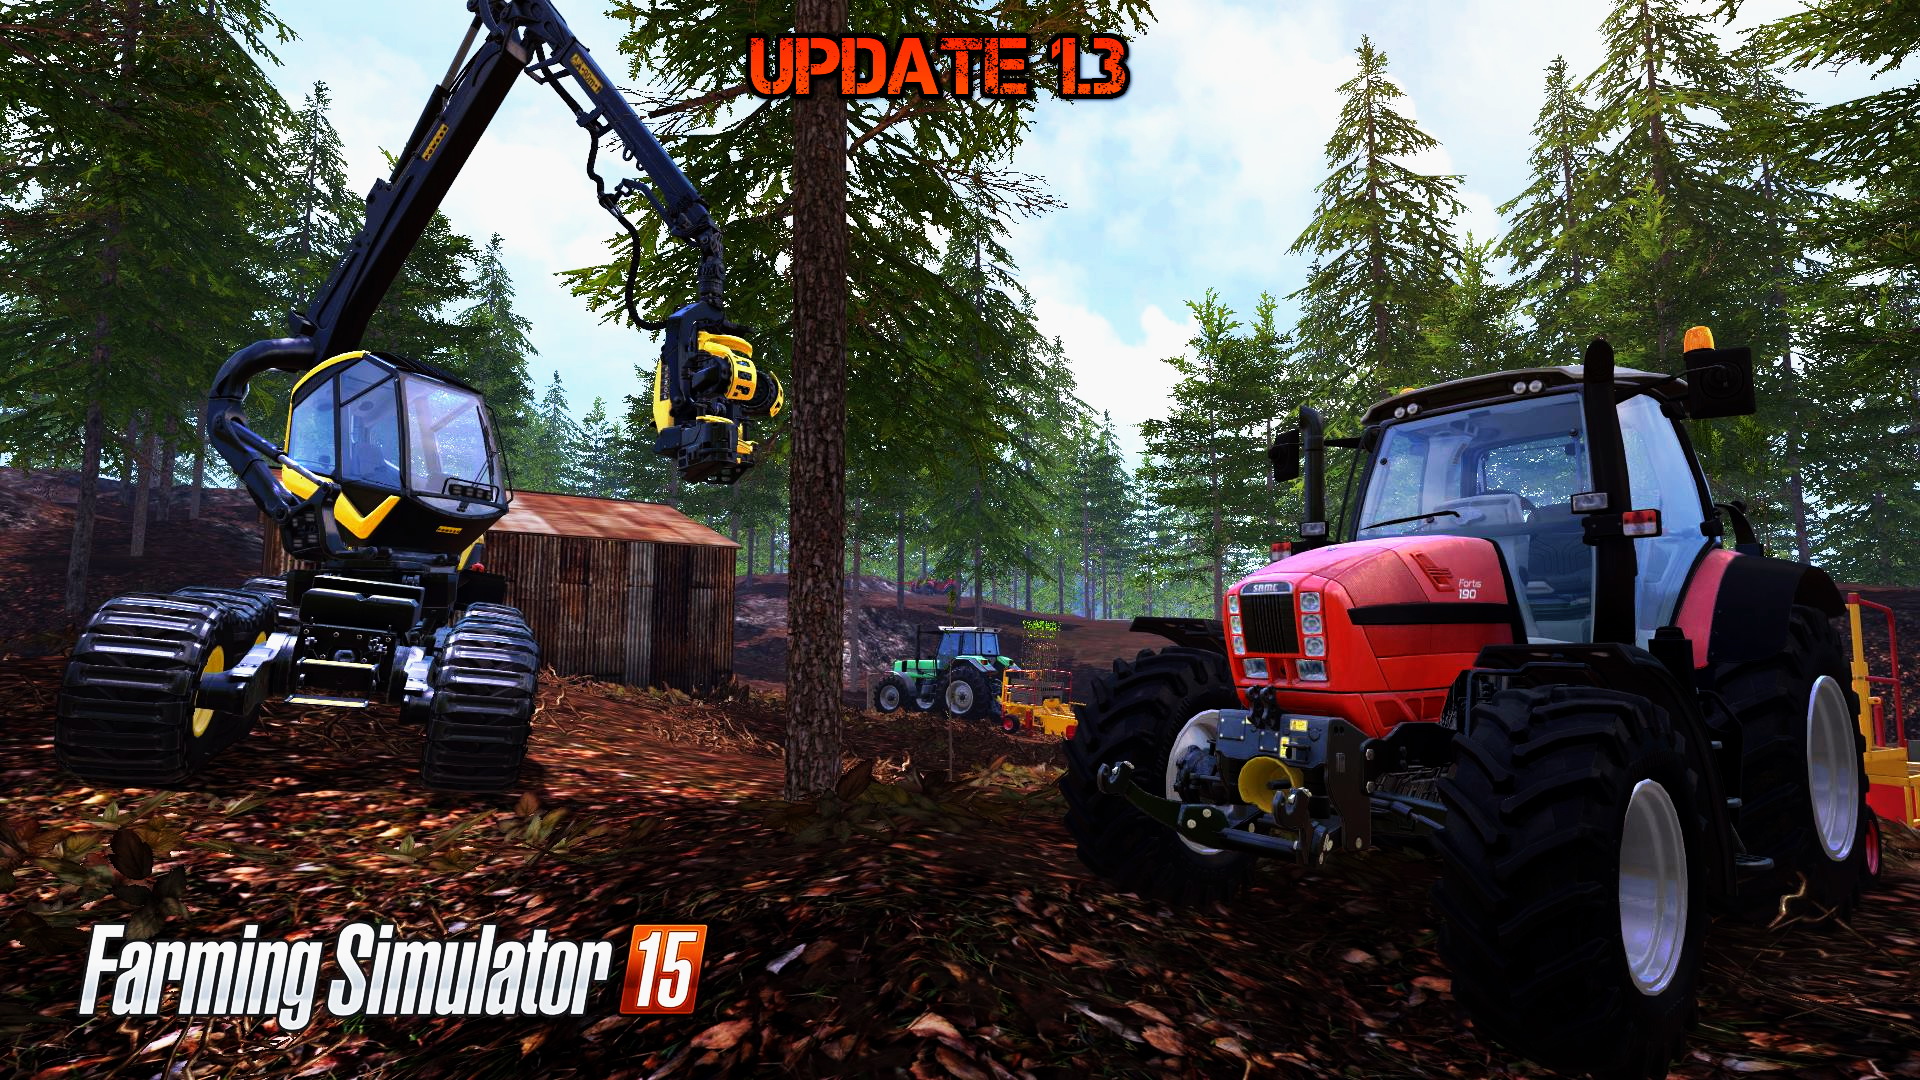 Download Update 1.3 for FS 2015